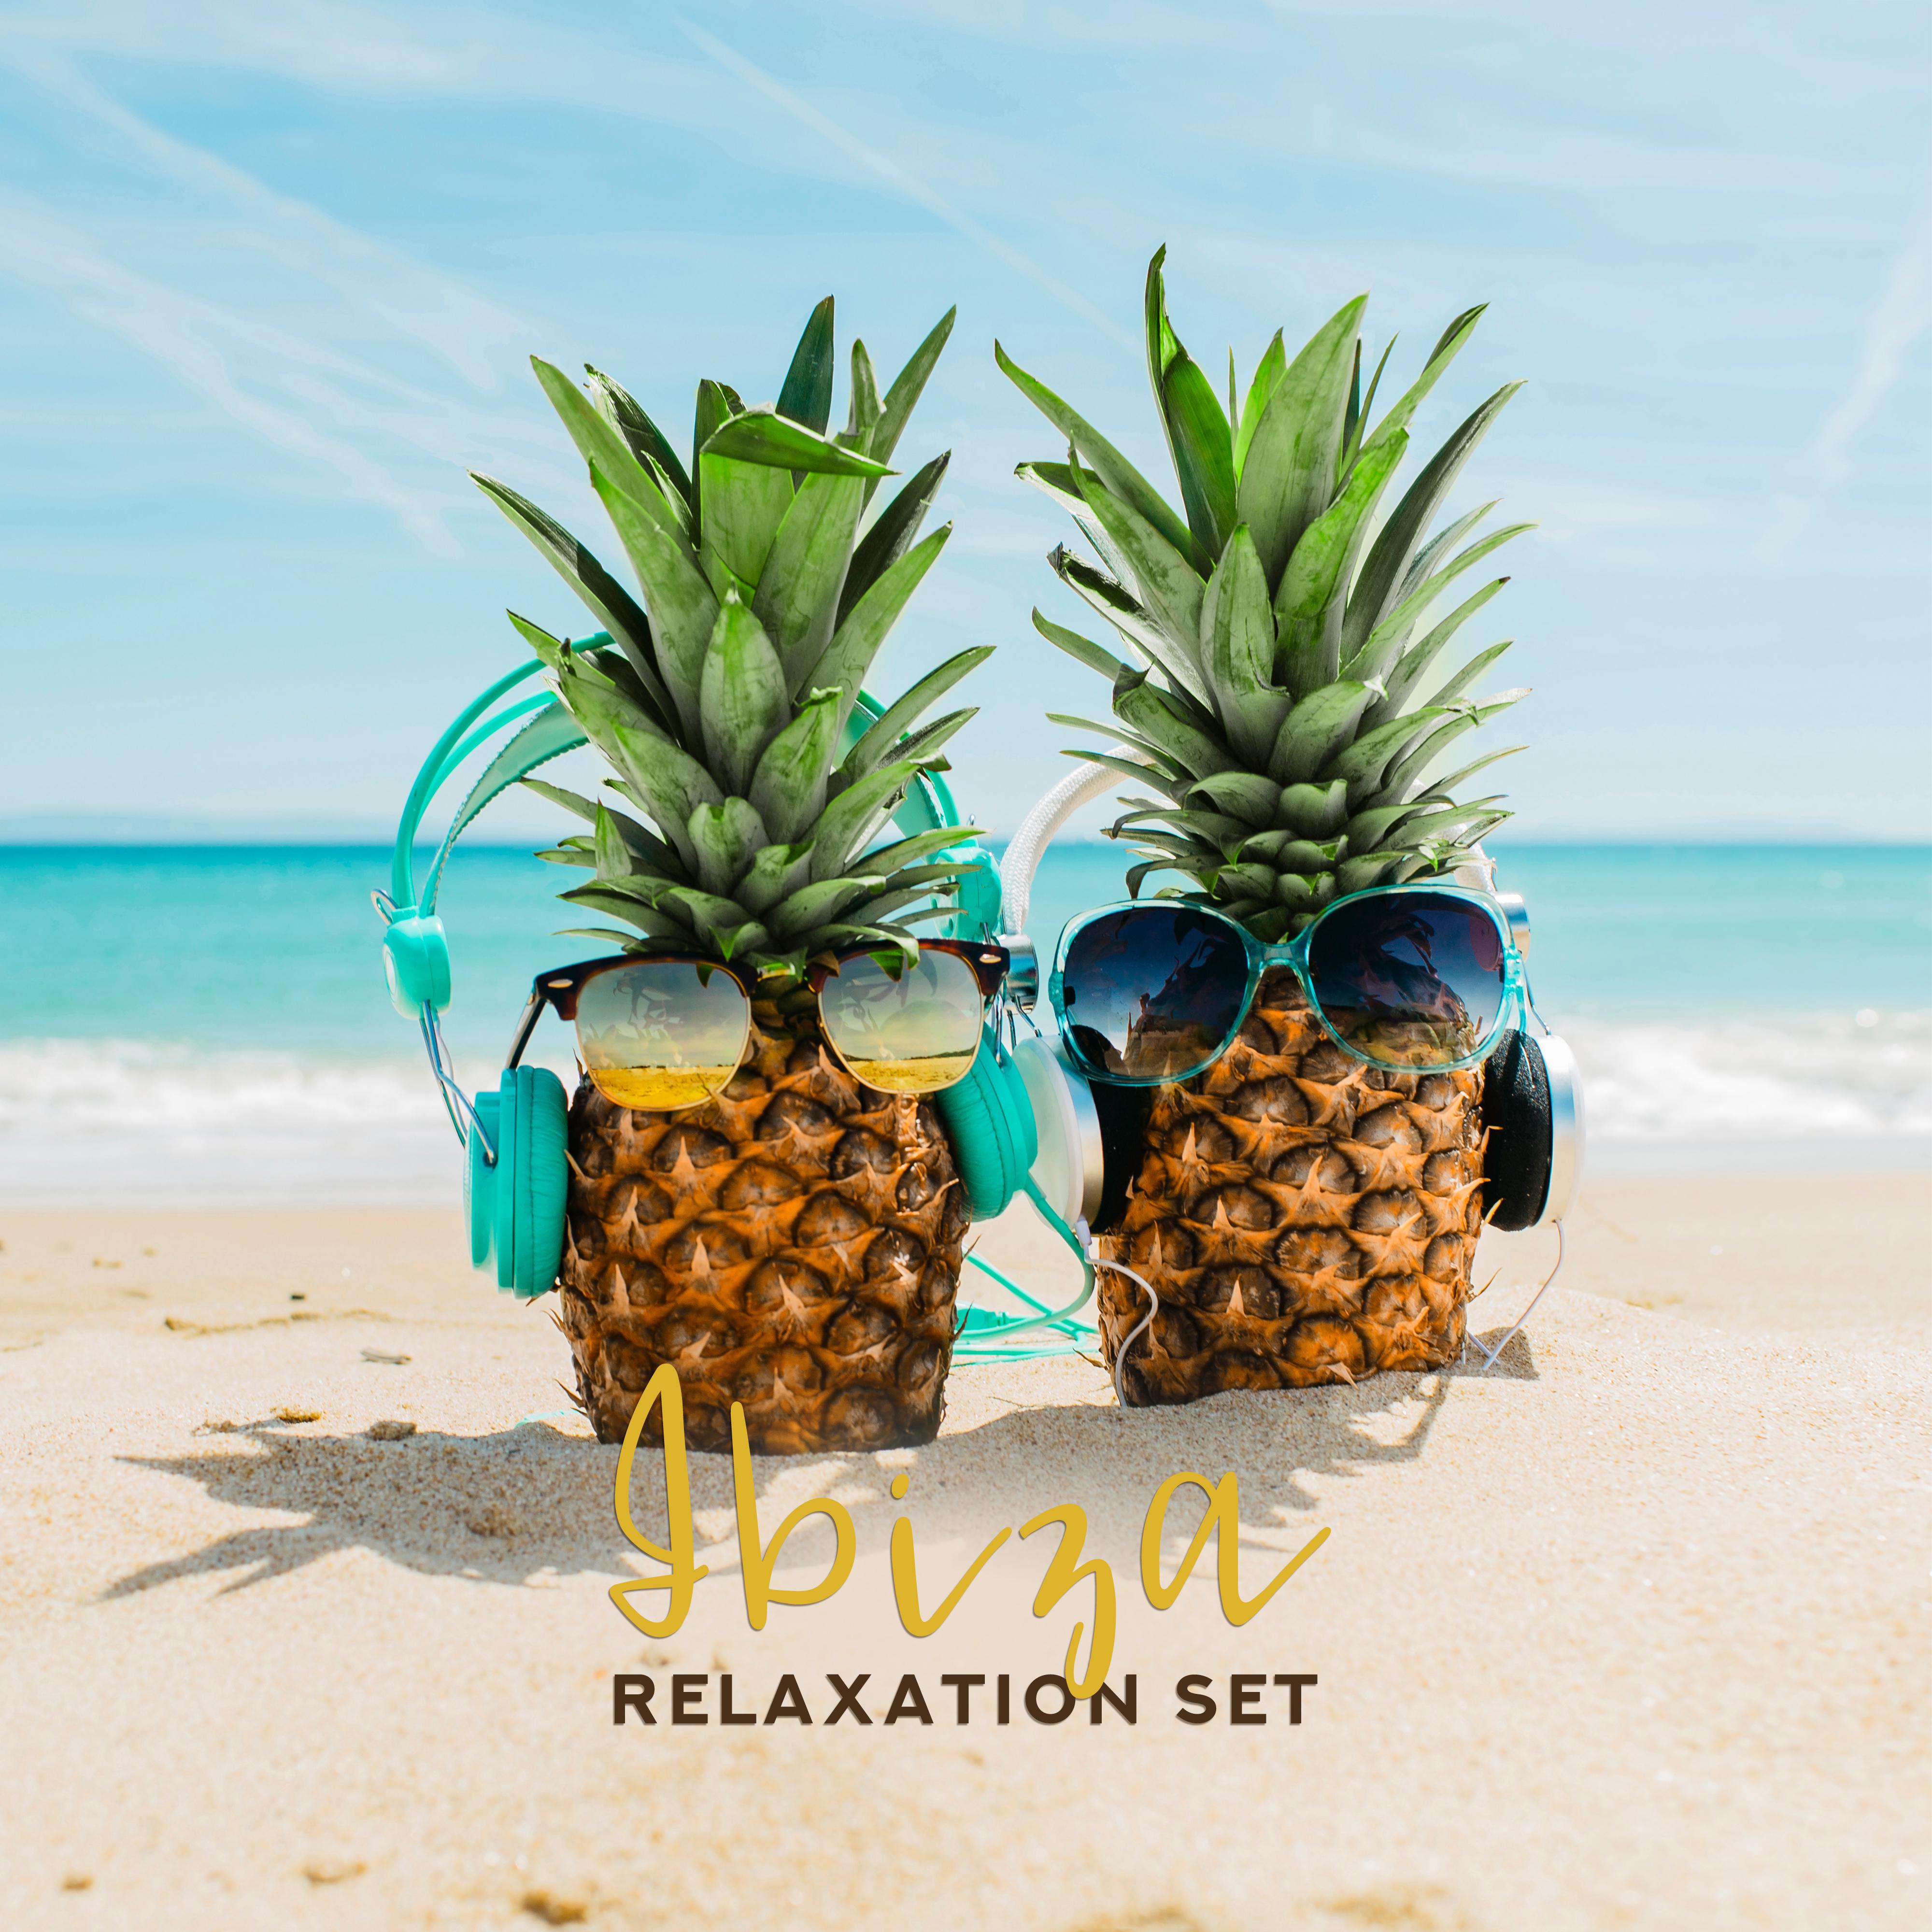 Ibiza Relaxation Set: Slow Chillout Melodies for Rest and Total Relaxation, Soothing Music for a Moment of Respite